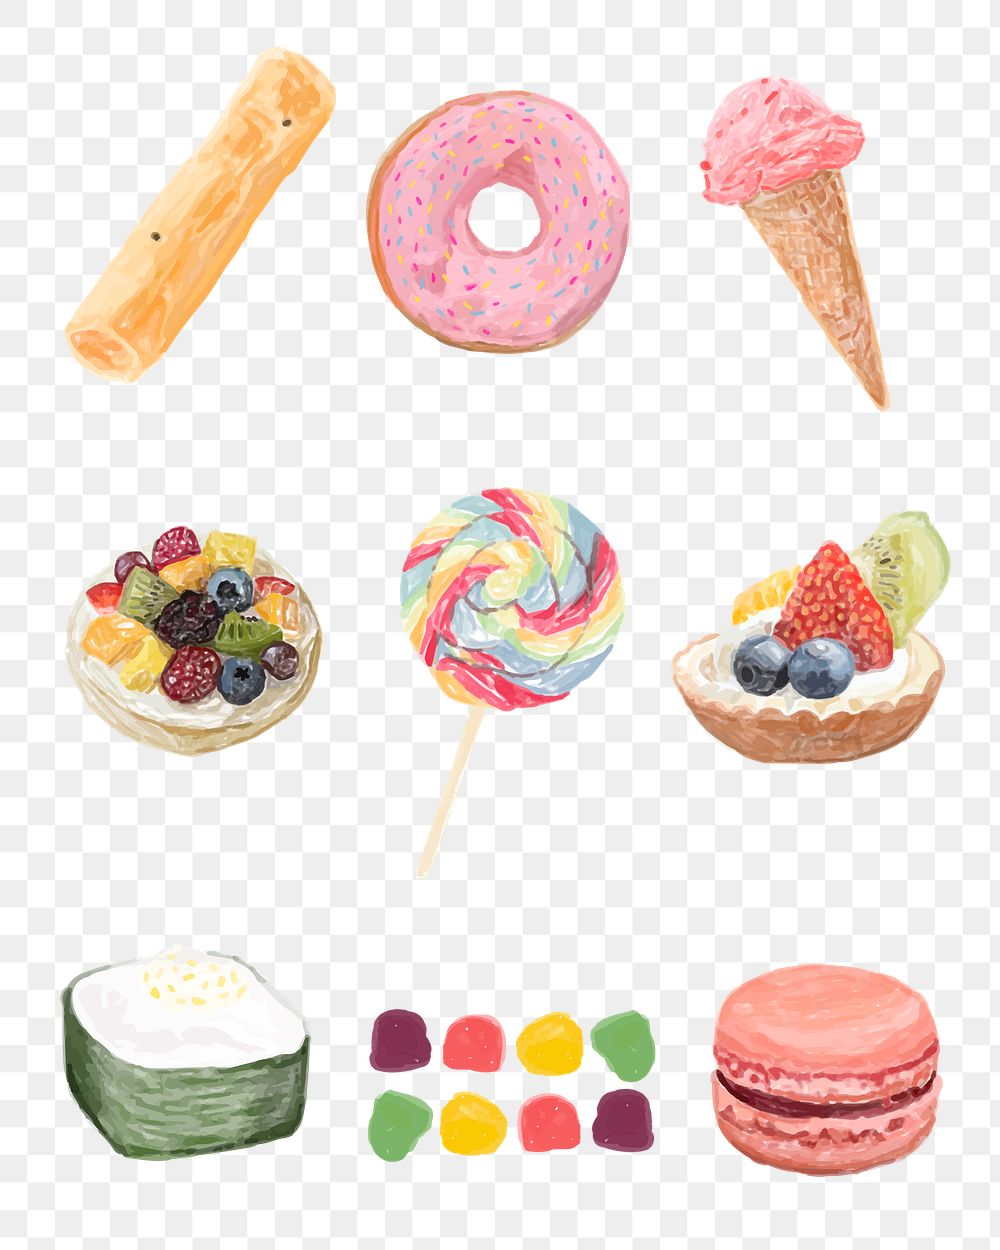 Sweet dessert png sticker watercolor collection